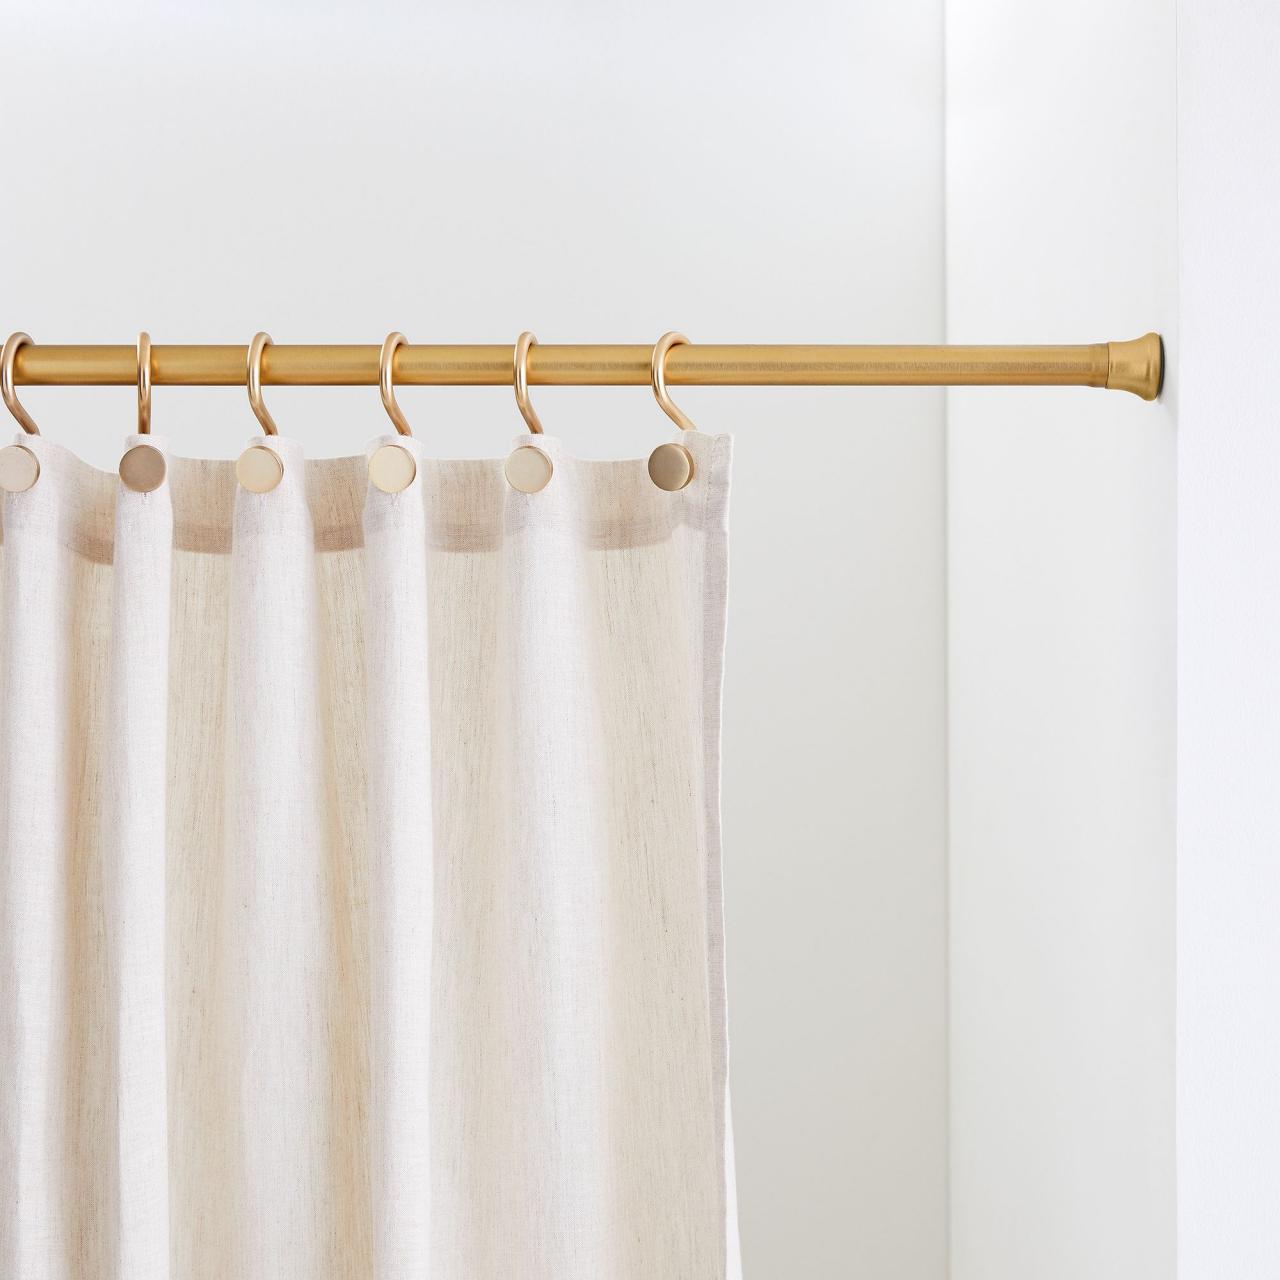 How To: Create An Antique Brass Finish  Diy curtain rods, Diy curtains,  Diy hanging shelves